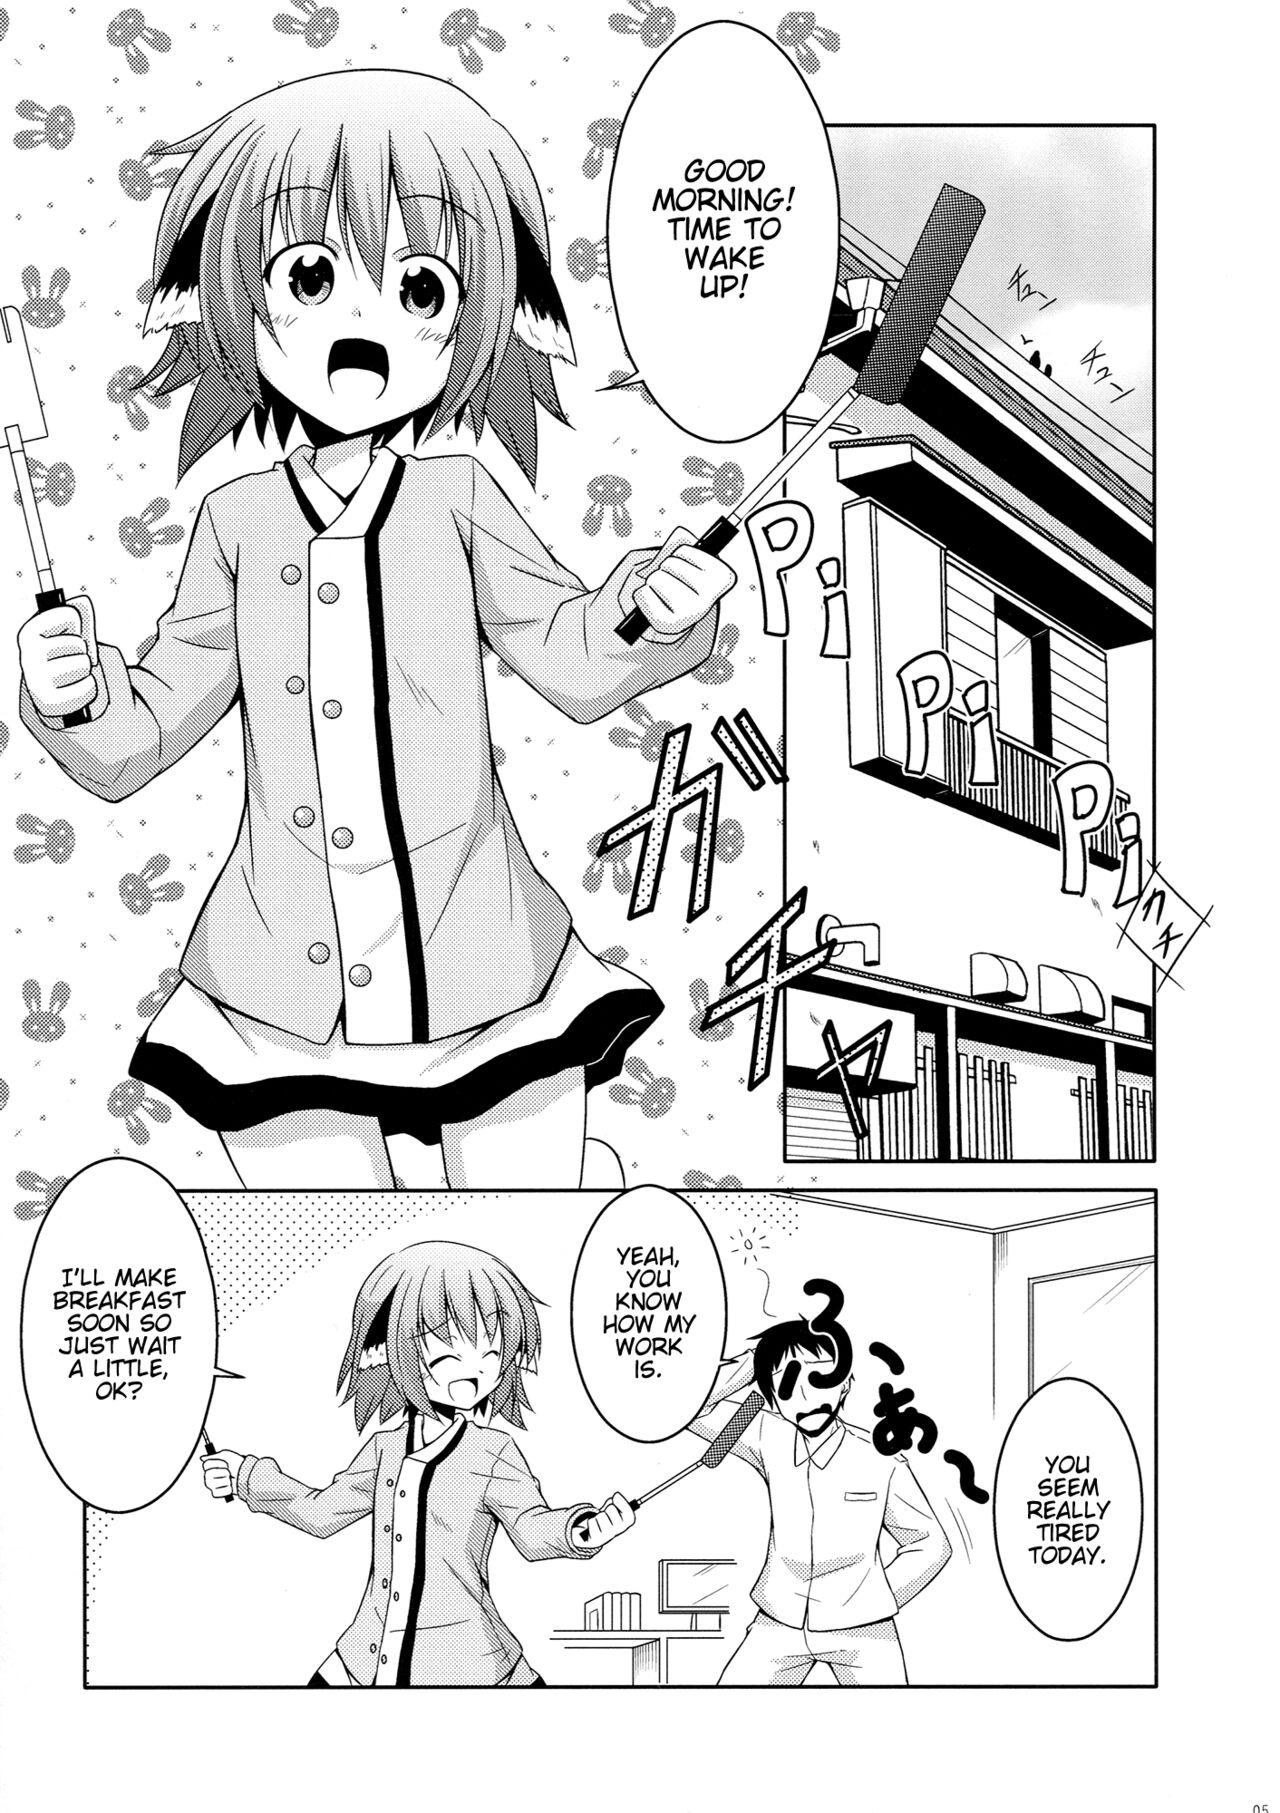 Huge Ass Kyouko no Hibi | Kyouko's Daily Life - Touhou project Eating - Page 4